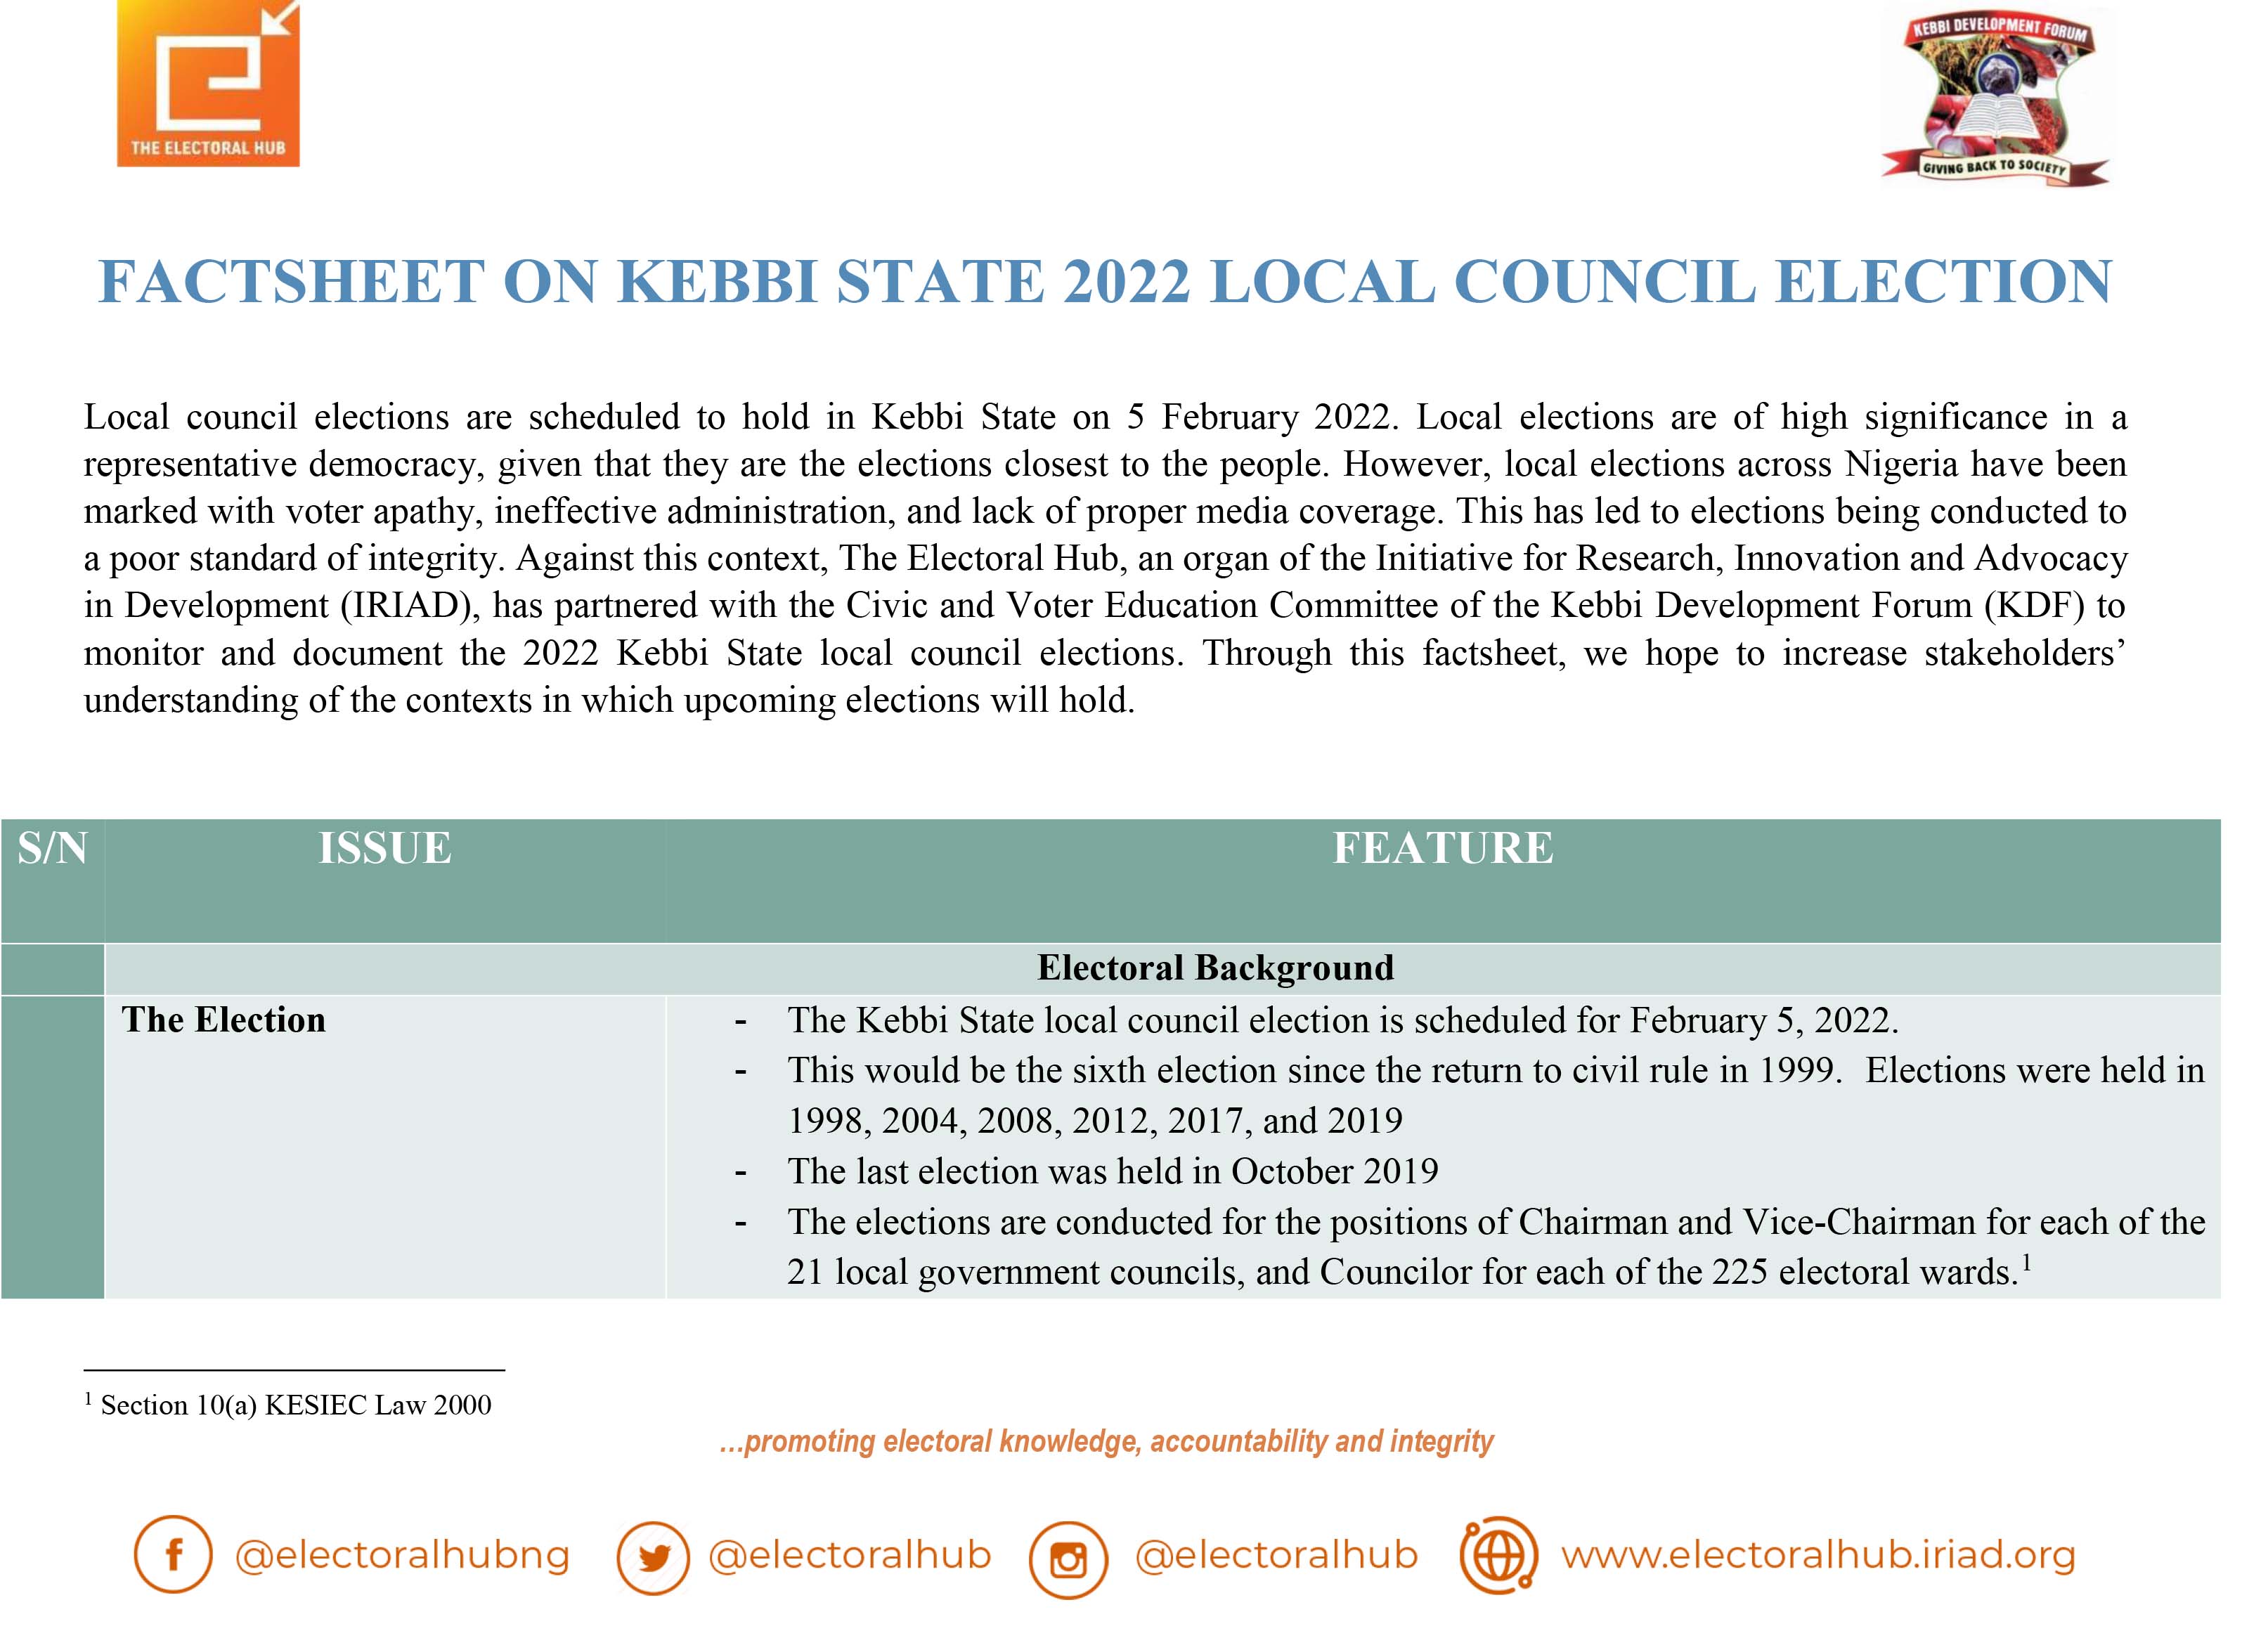 Factsheet on Kebbi State 2022 Local Council Election